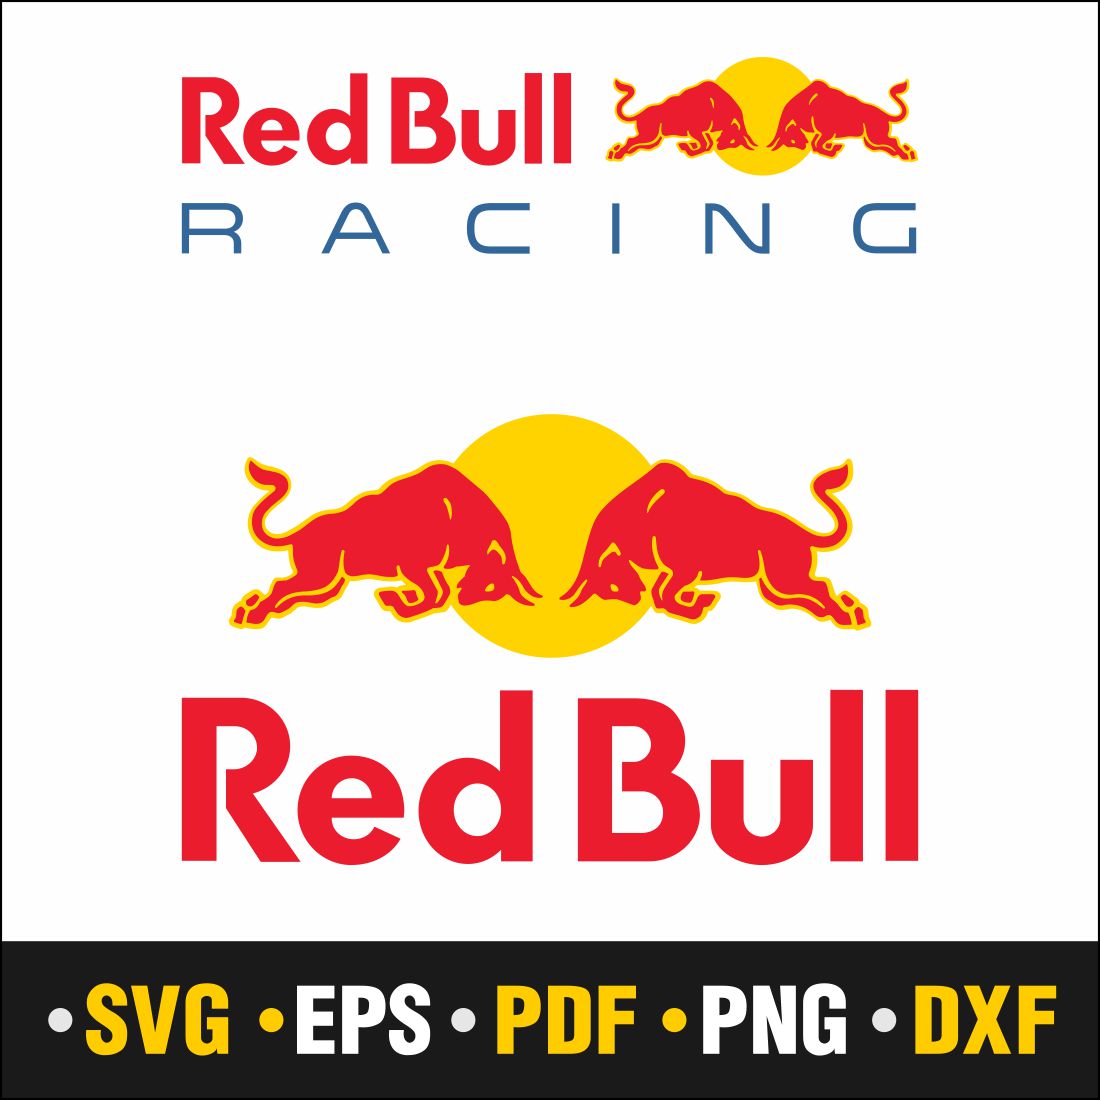 Redbull, Redbull Svg, Redbull Monogram Svg, Redbull Png, Bull Png, Red Bulls Svg, Instant Download Vector Cut file Cricut, Silhouette, Pdf Png, Dxf, Decal cover image.